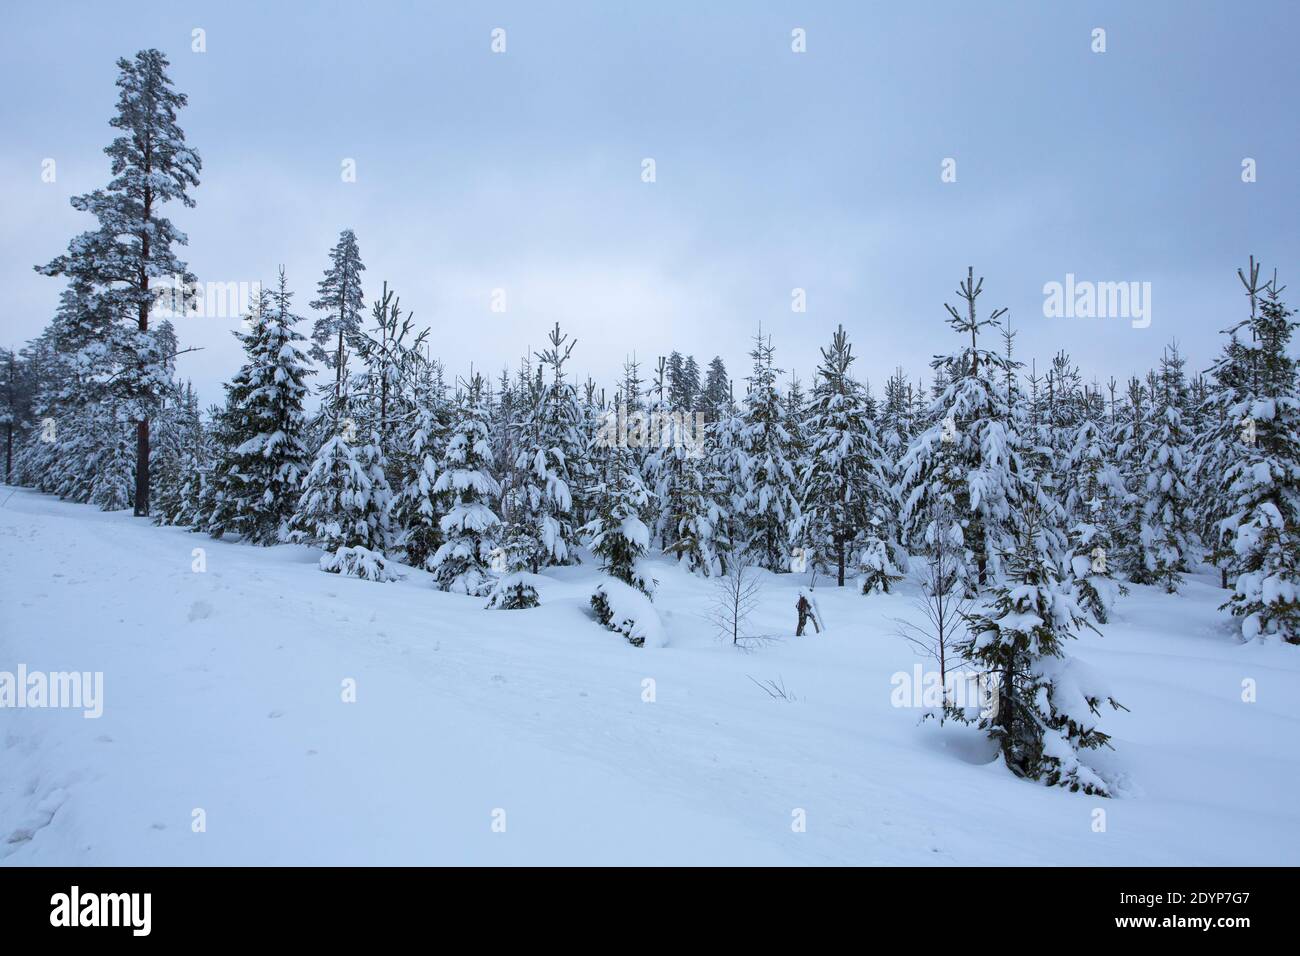 Norway Spruce trees, Picea abies, covered in snow in a winter landscape, Taken February, Svartadalen, Central Sweden Stock Photo